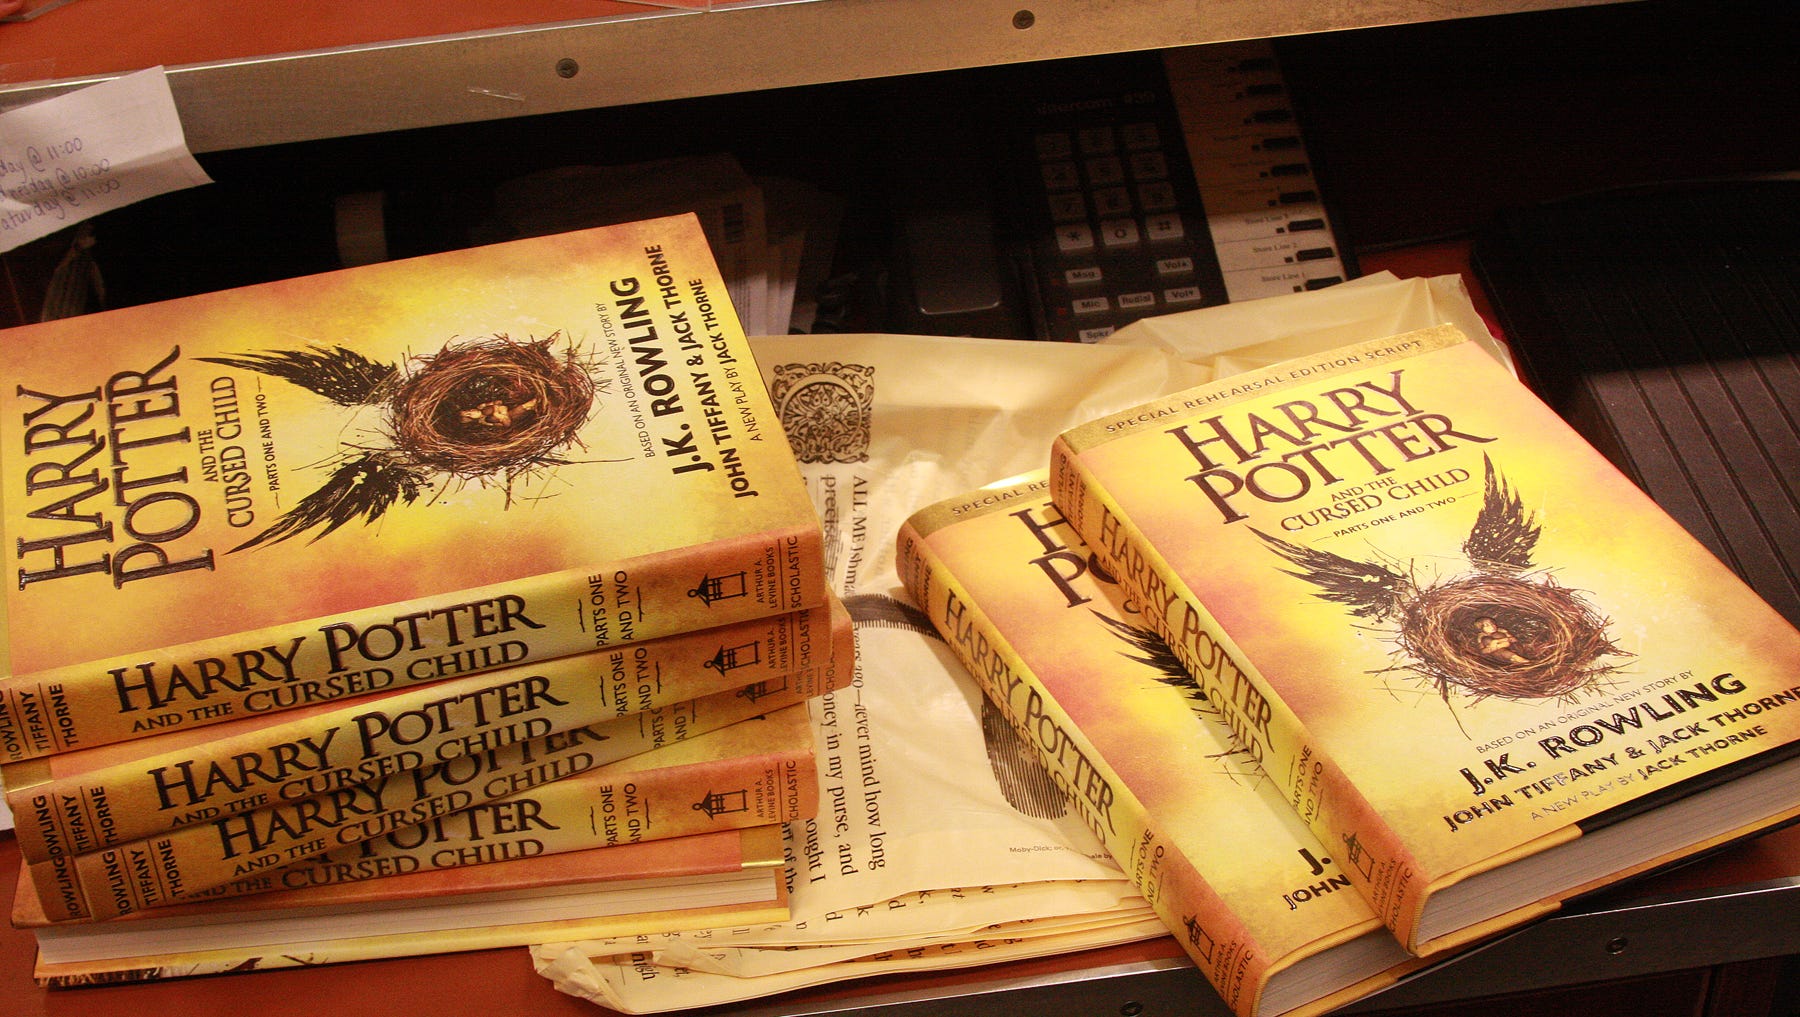 harry potter and the cursed child book barnes and noble